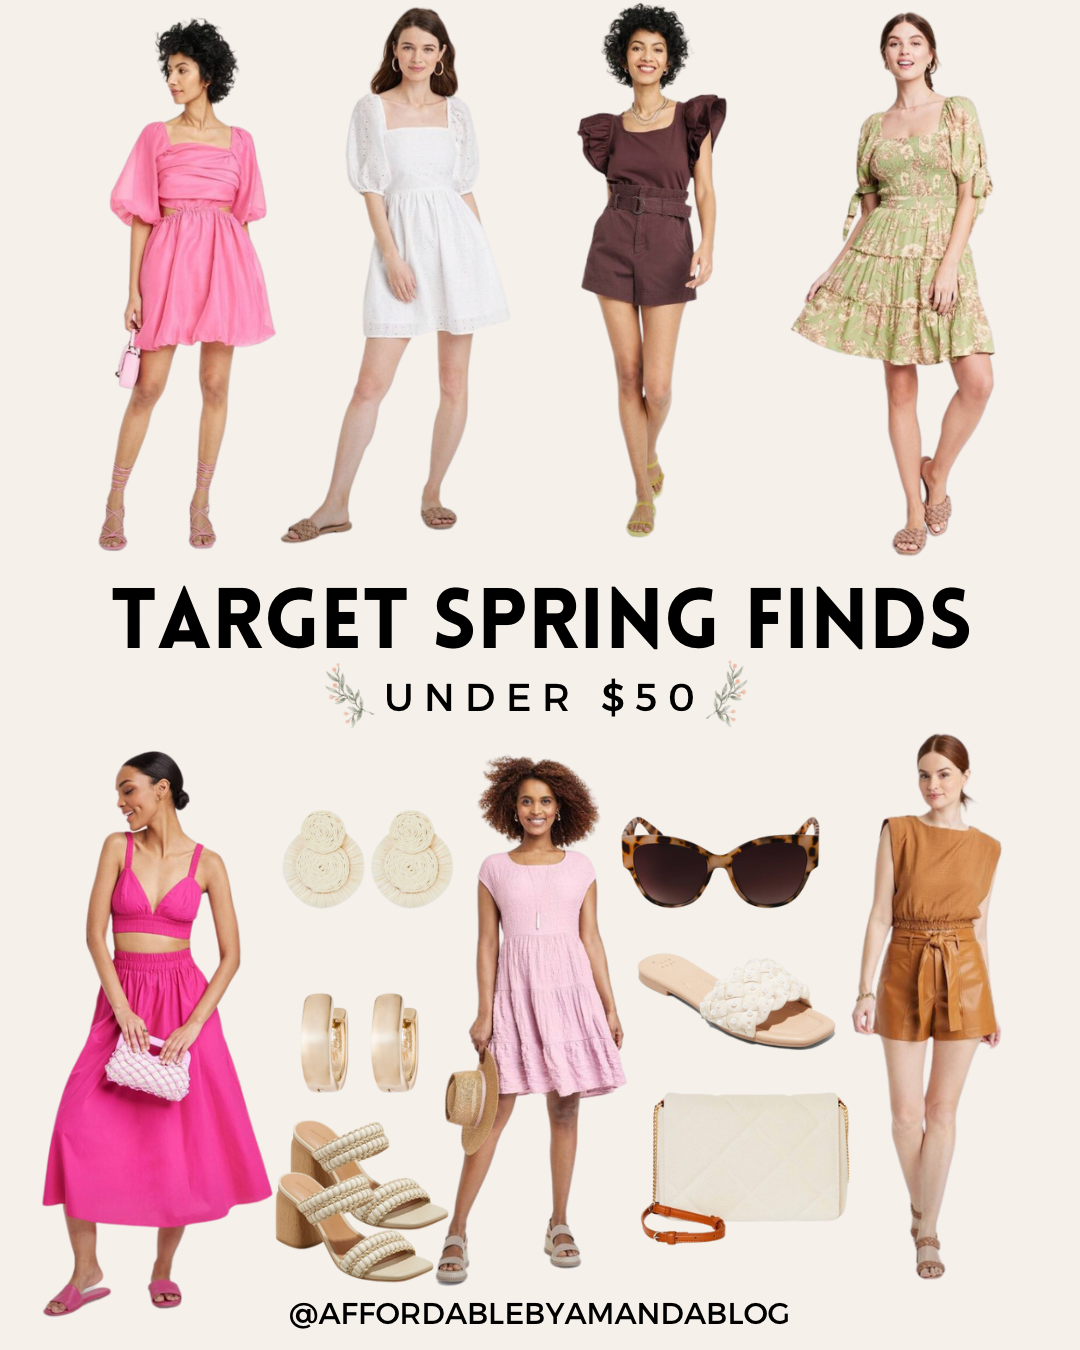 🎯 TARGET WOMEN'S CLOTHING‼️ TARGET SHOP WITH ME